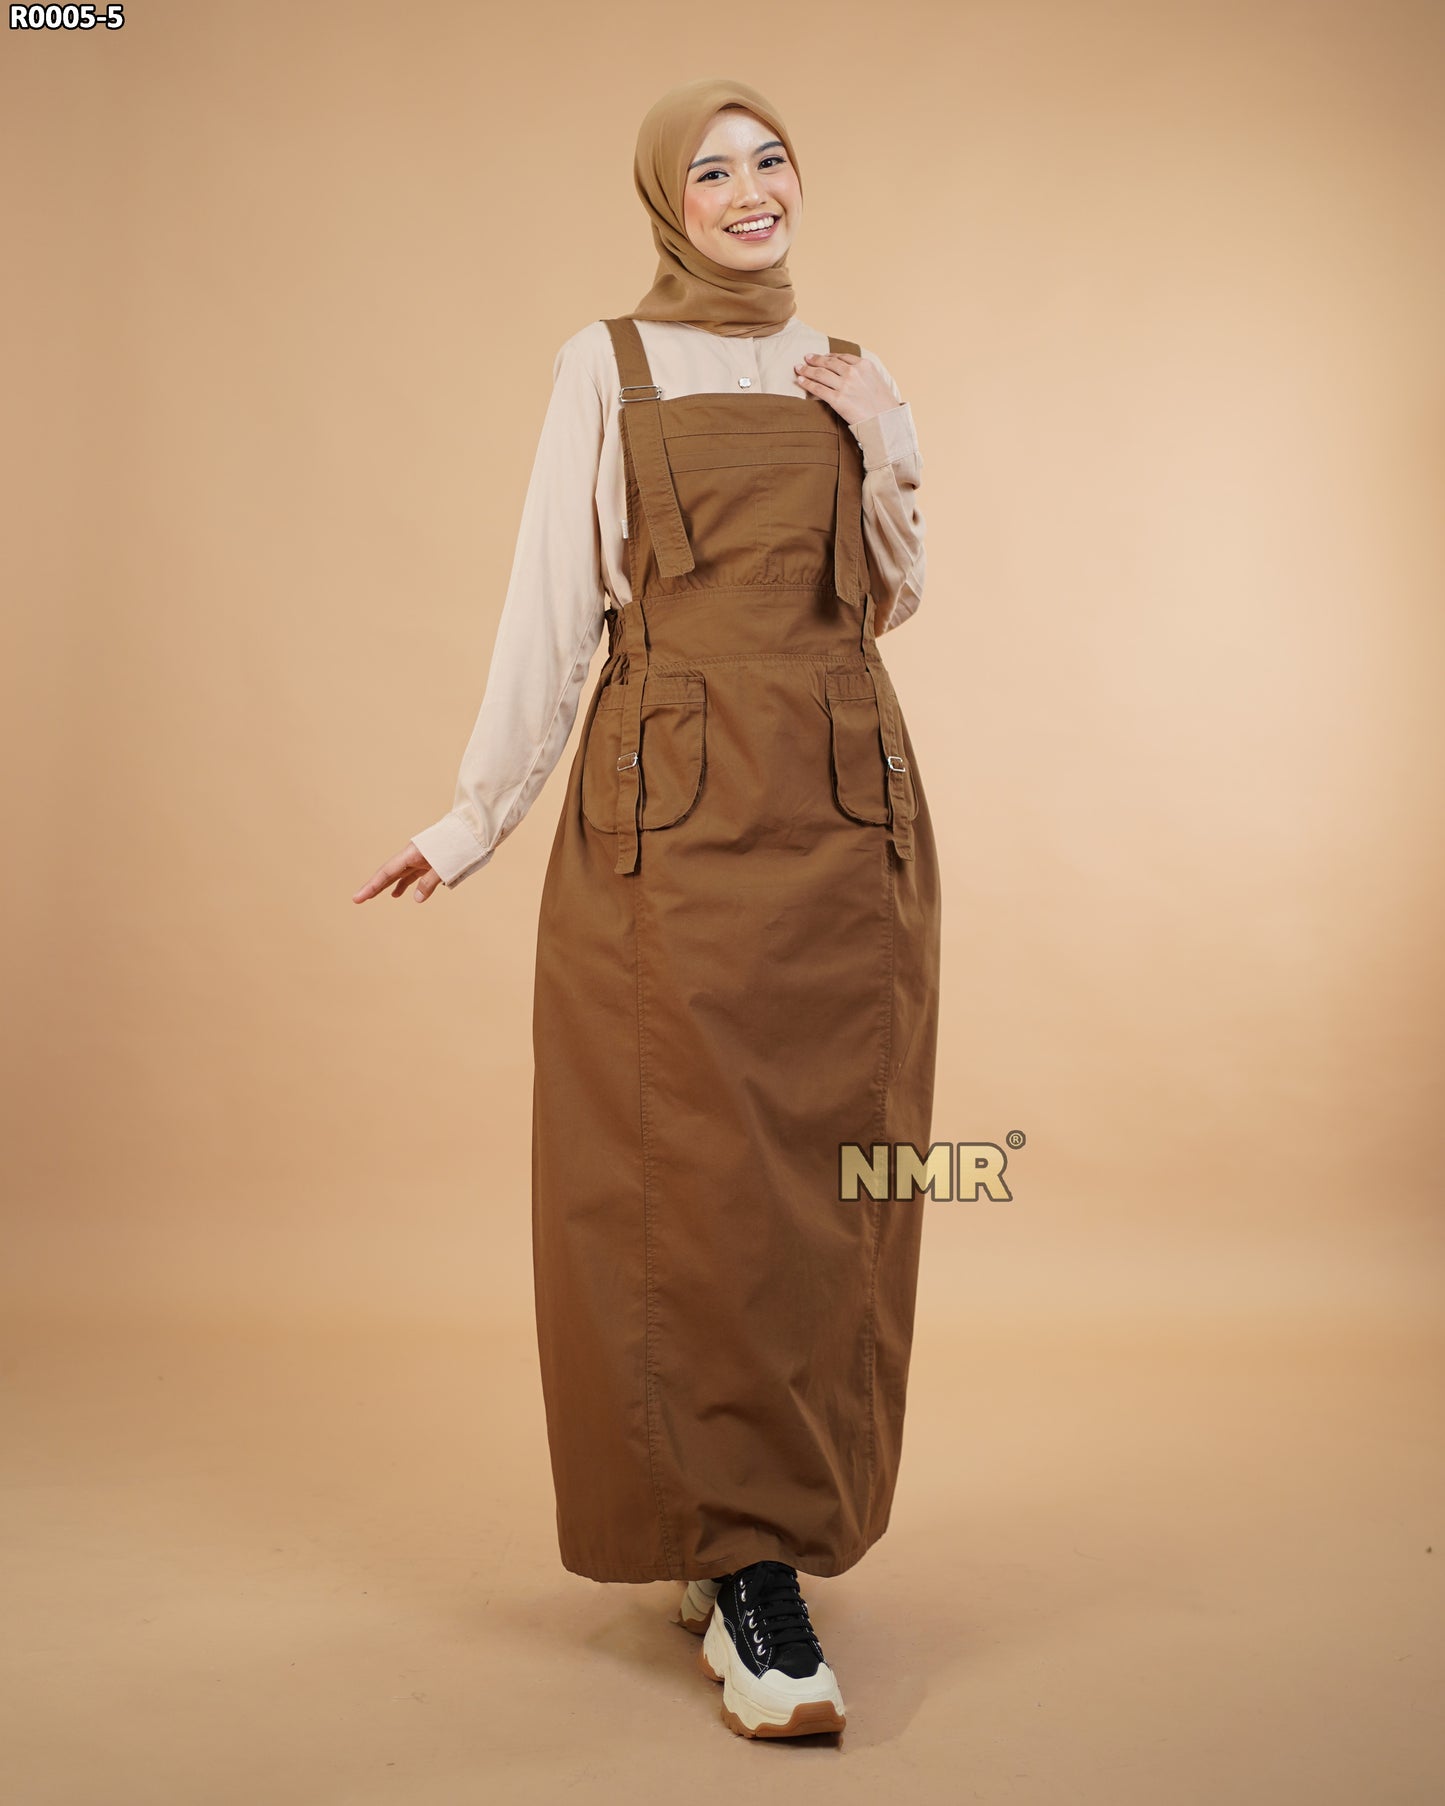 NMR Gamis Jumpsuit Overall Baby Canvas Vol R0005-5